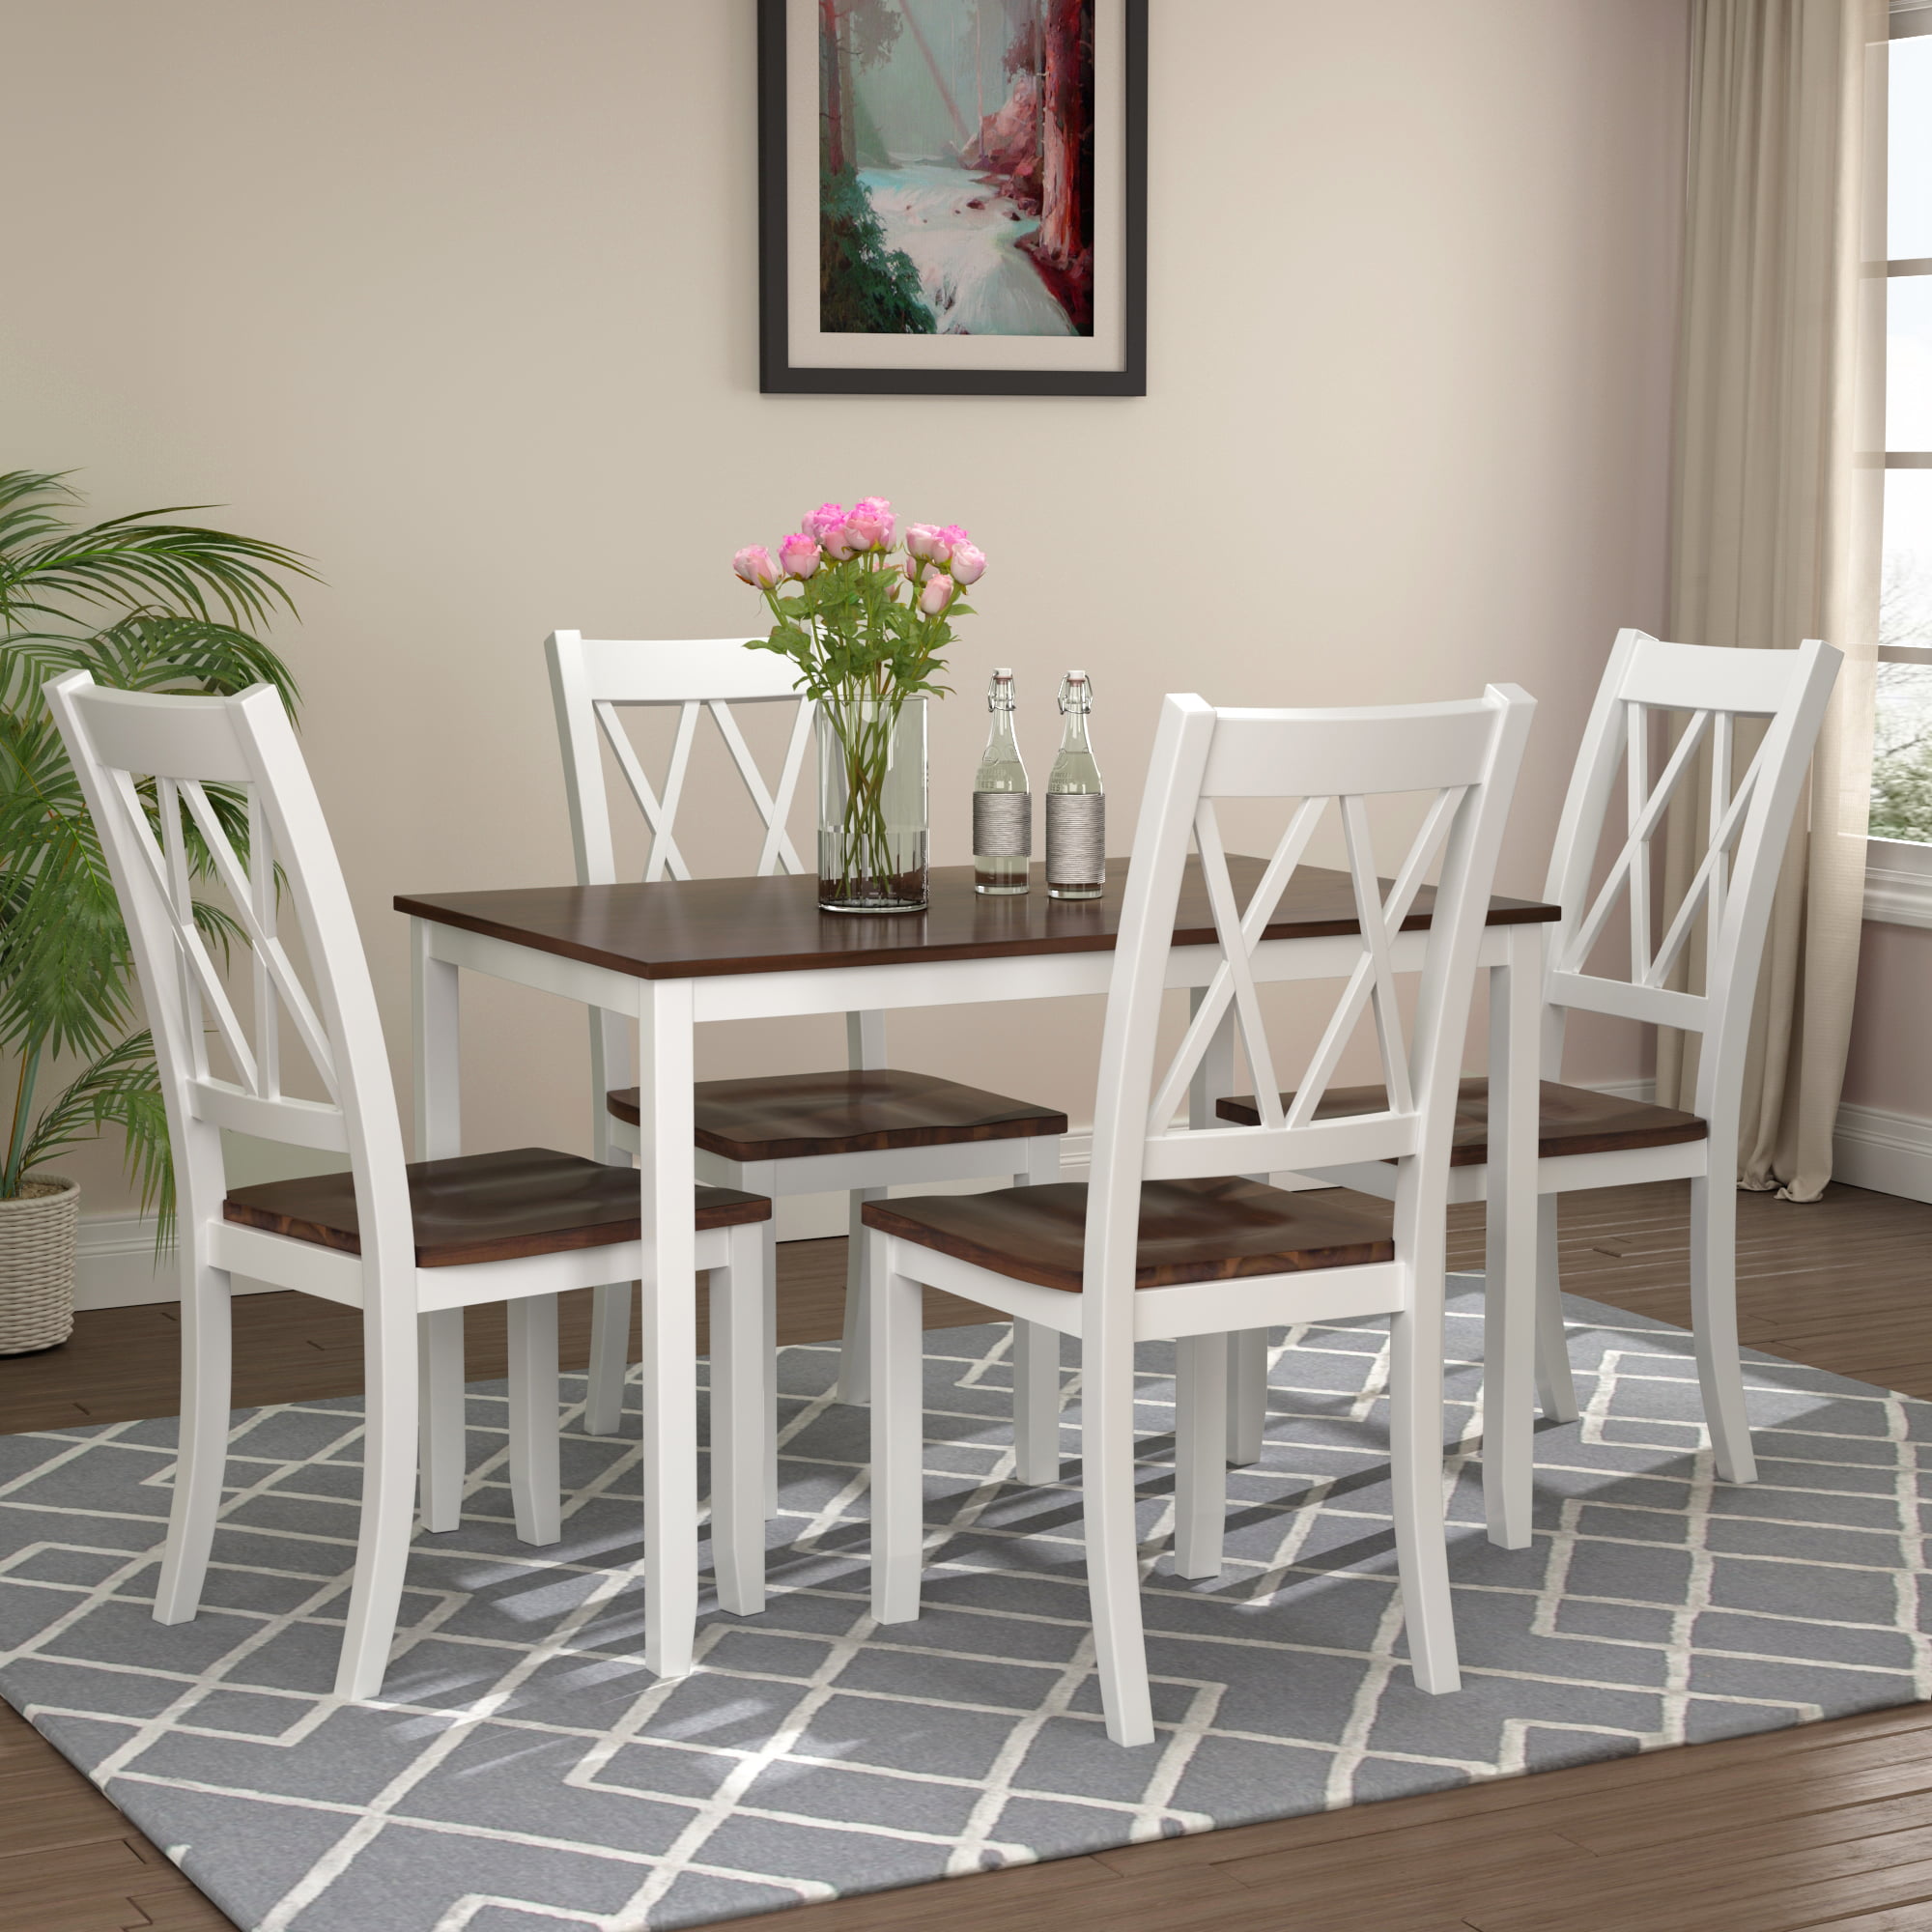 5 Piece Dining Table Set Square Kitchen Table With 4 Chairs Compact Dining Room Set Wood Home Kitchen Table And Chairs For 4 Person Ideal For Dining Room Kitchen Apartment Small Space